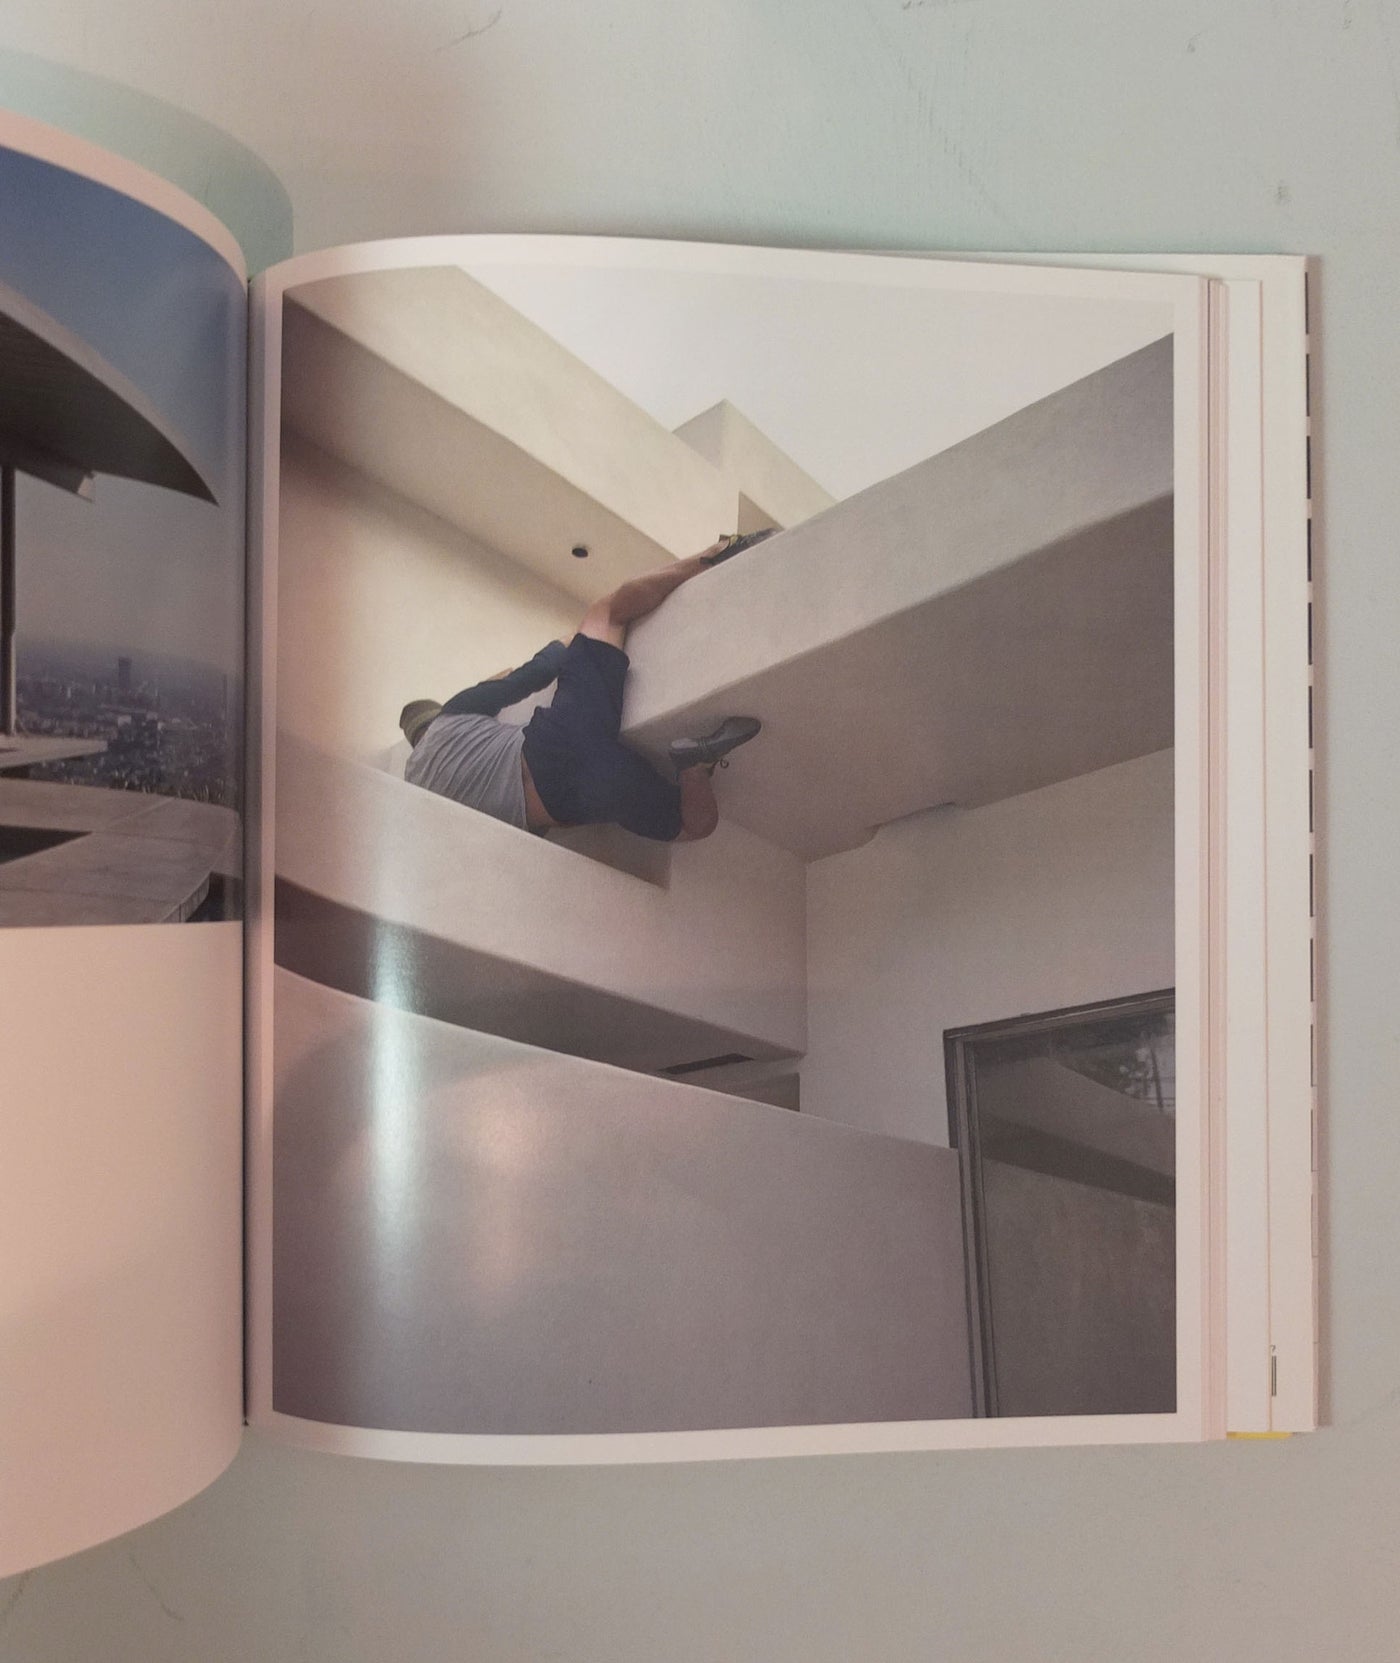 Shooting Space: Architecture in Contemporary Photography by Elias Redstone}